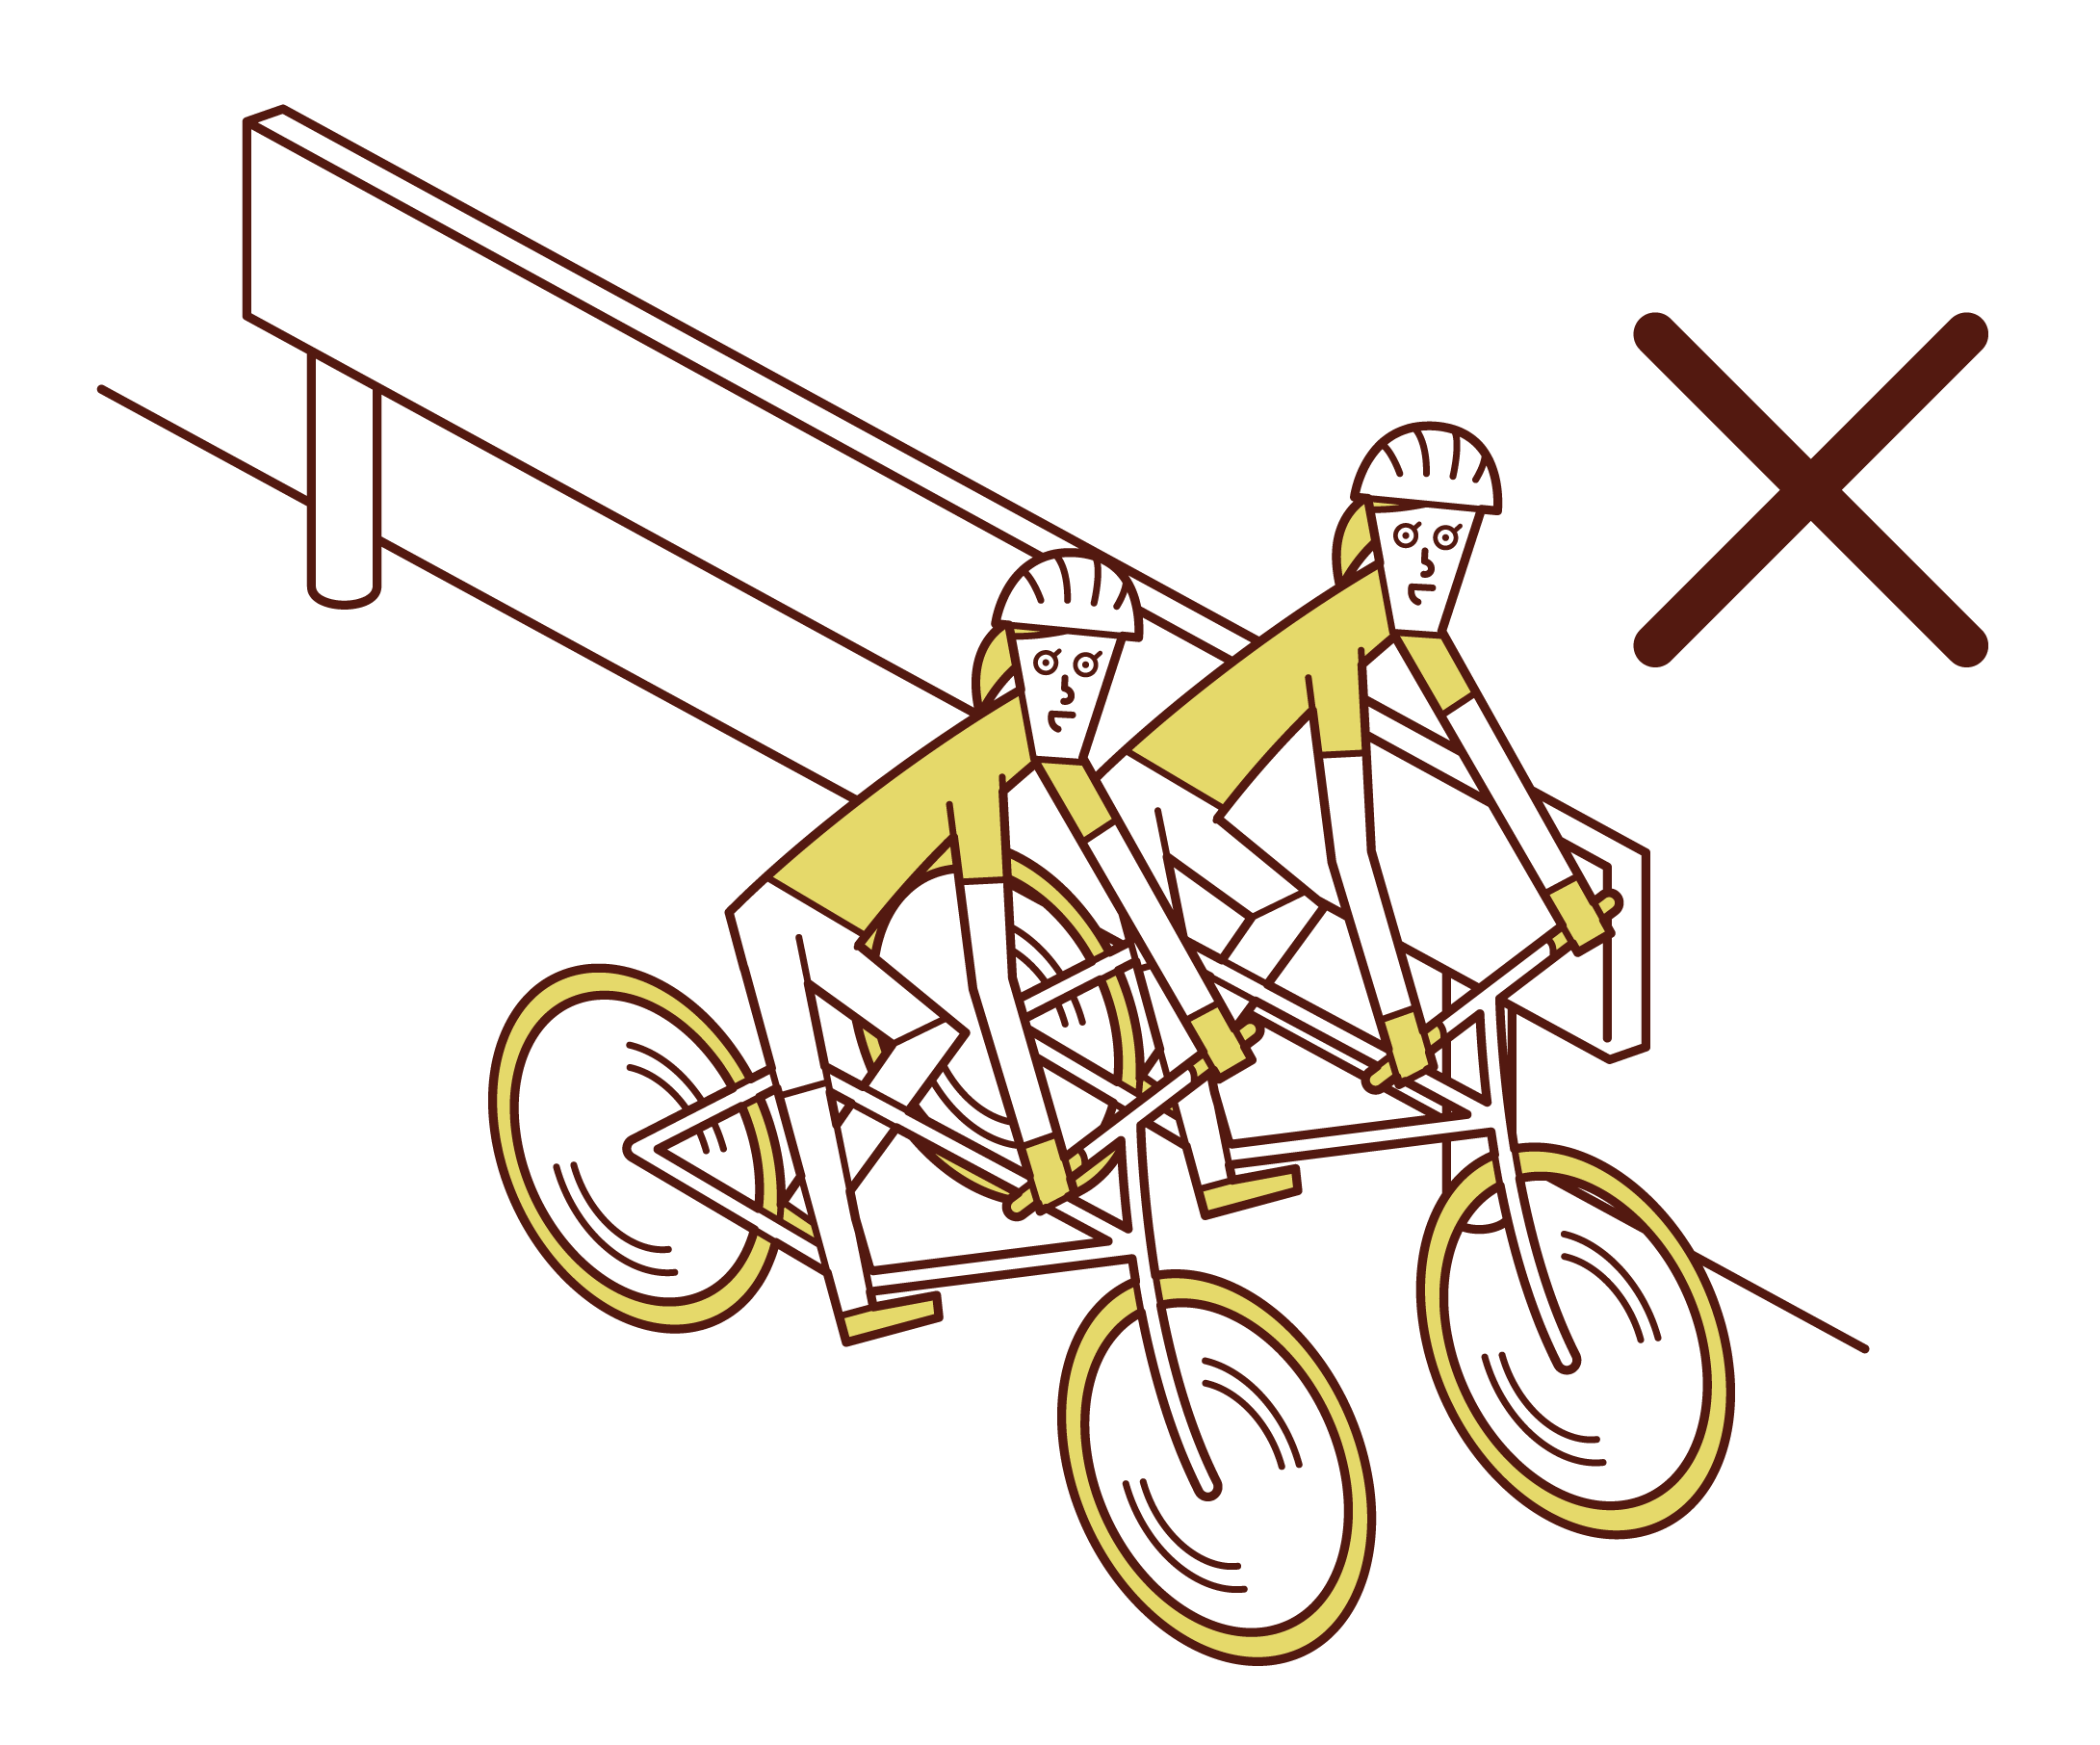 Illustration of people (women) running side by side on bicycles